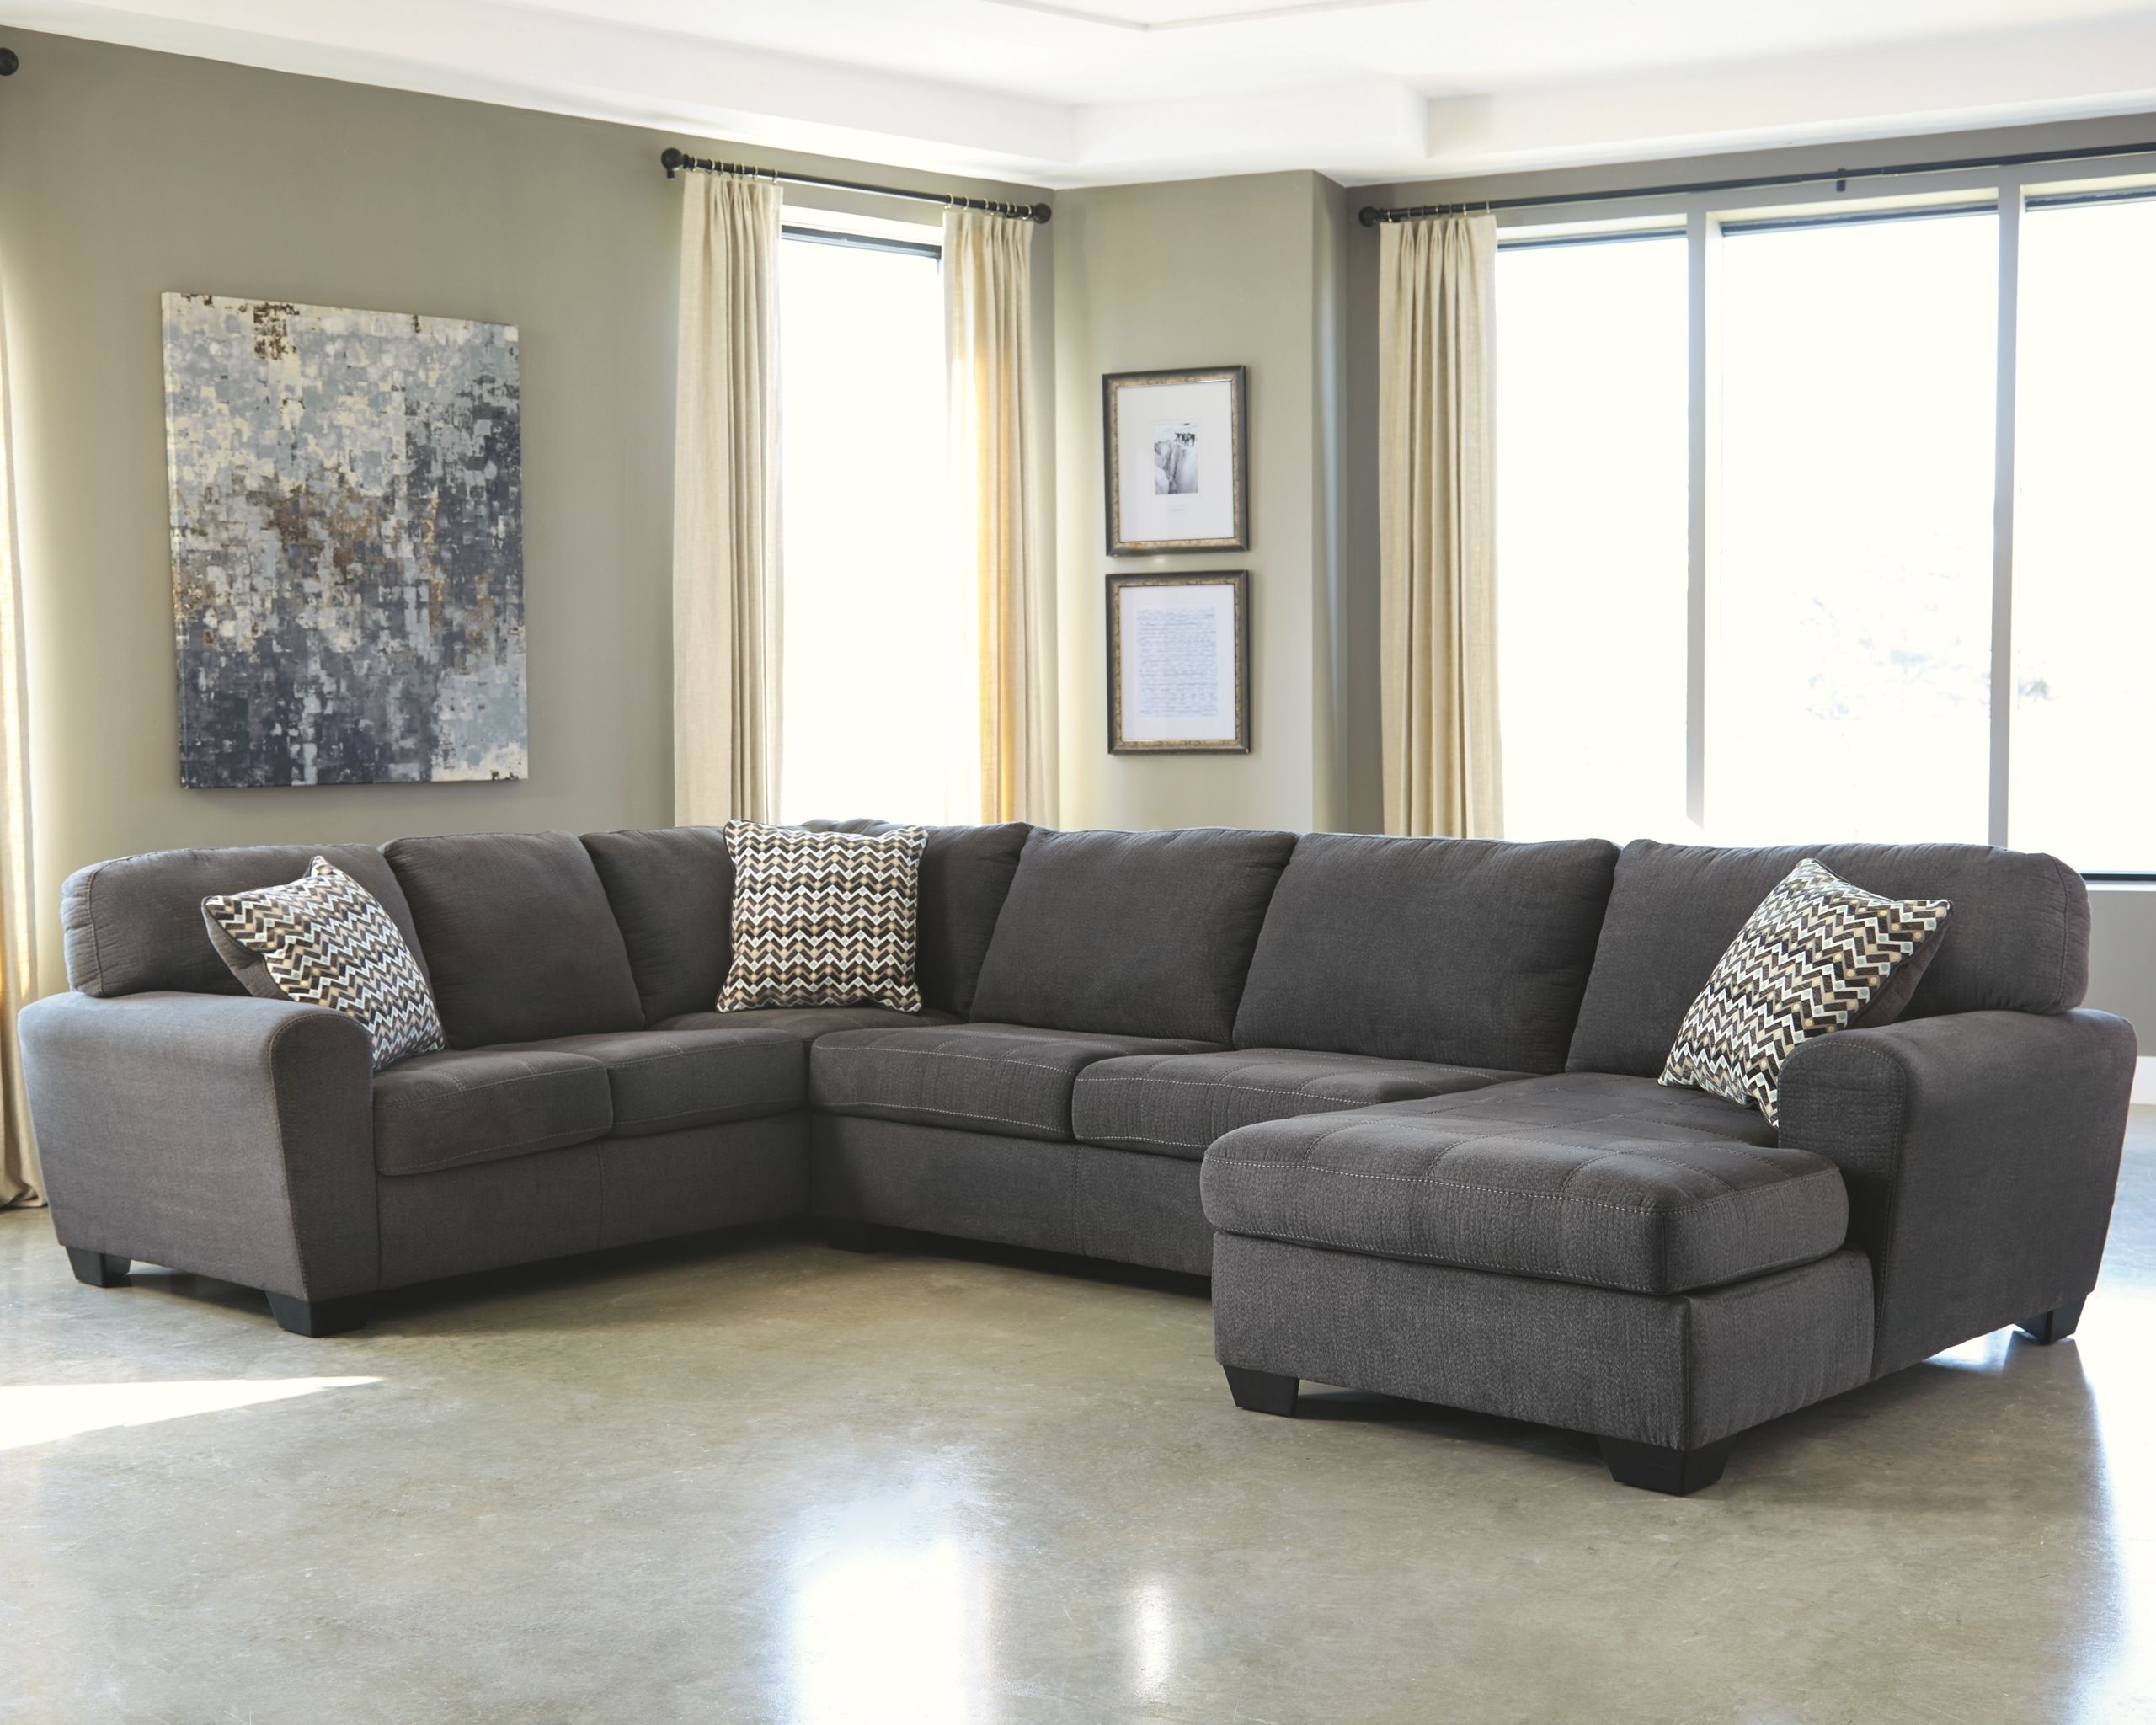 Grey Sectional Living Room Ideas – Foter With Dark Gray Sectional Sofas (View 8 of 15)